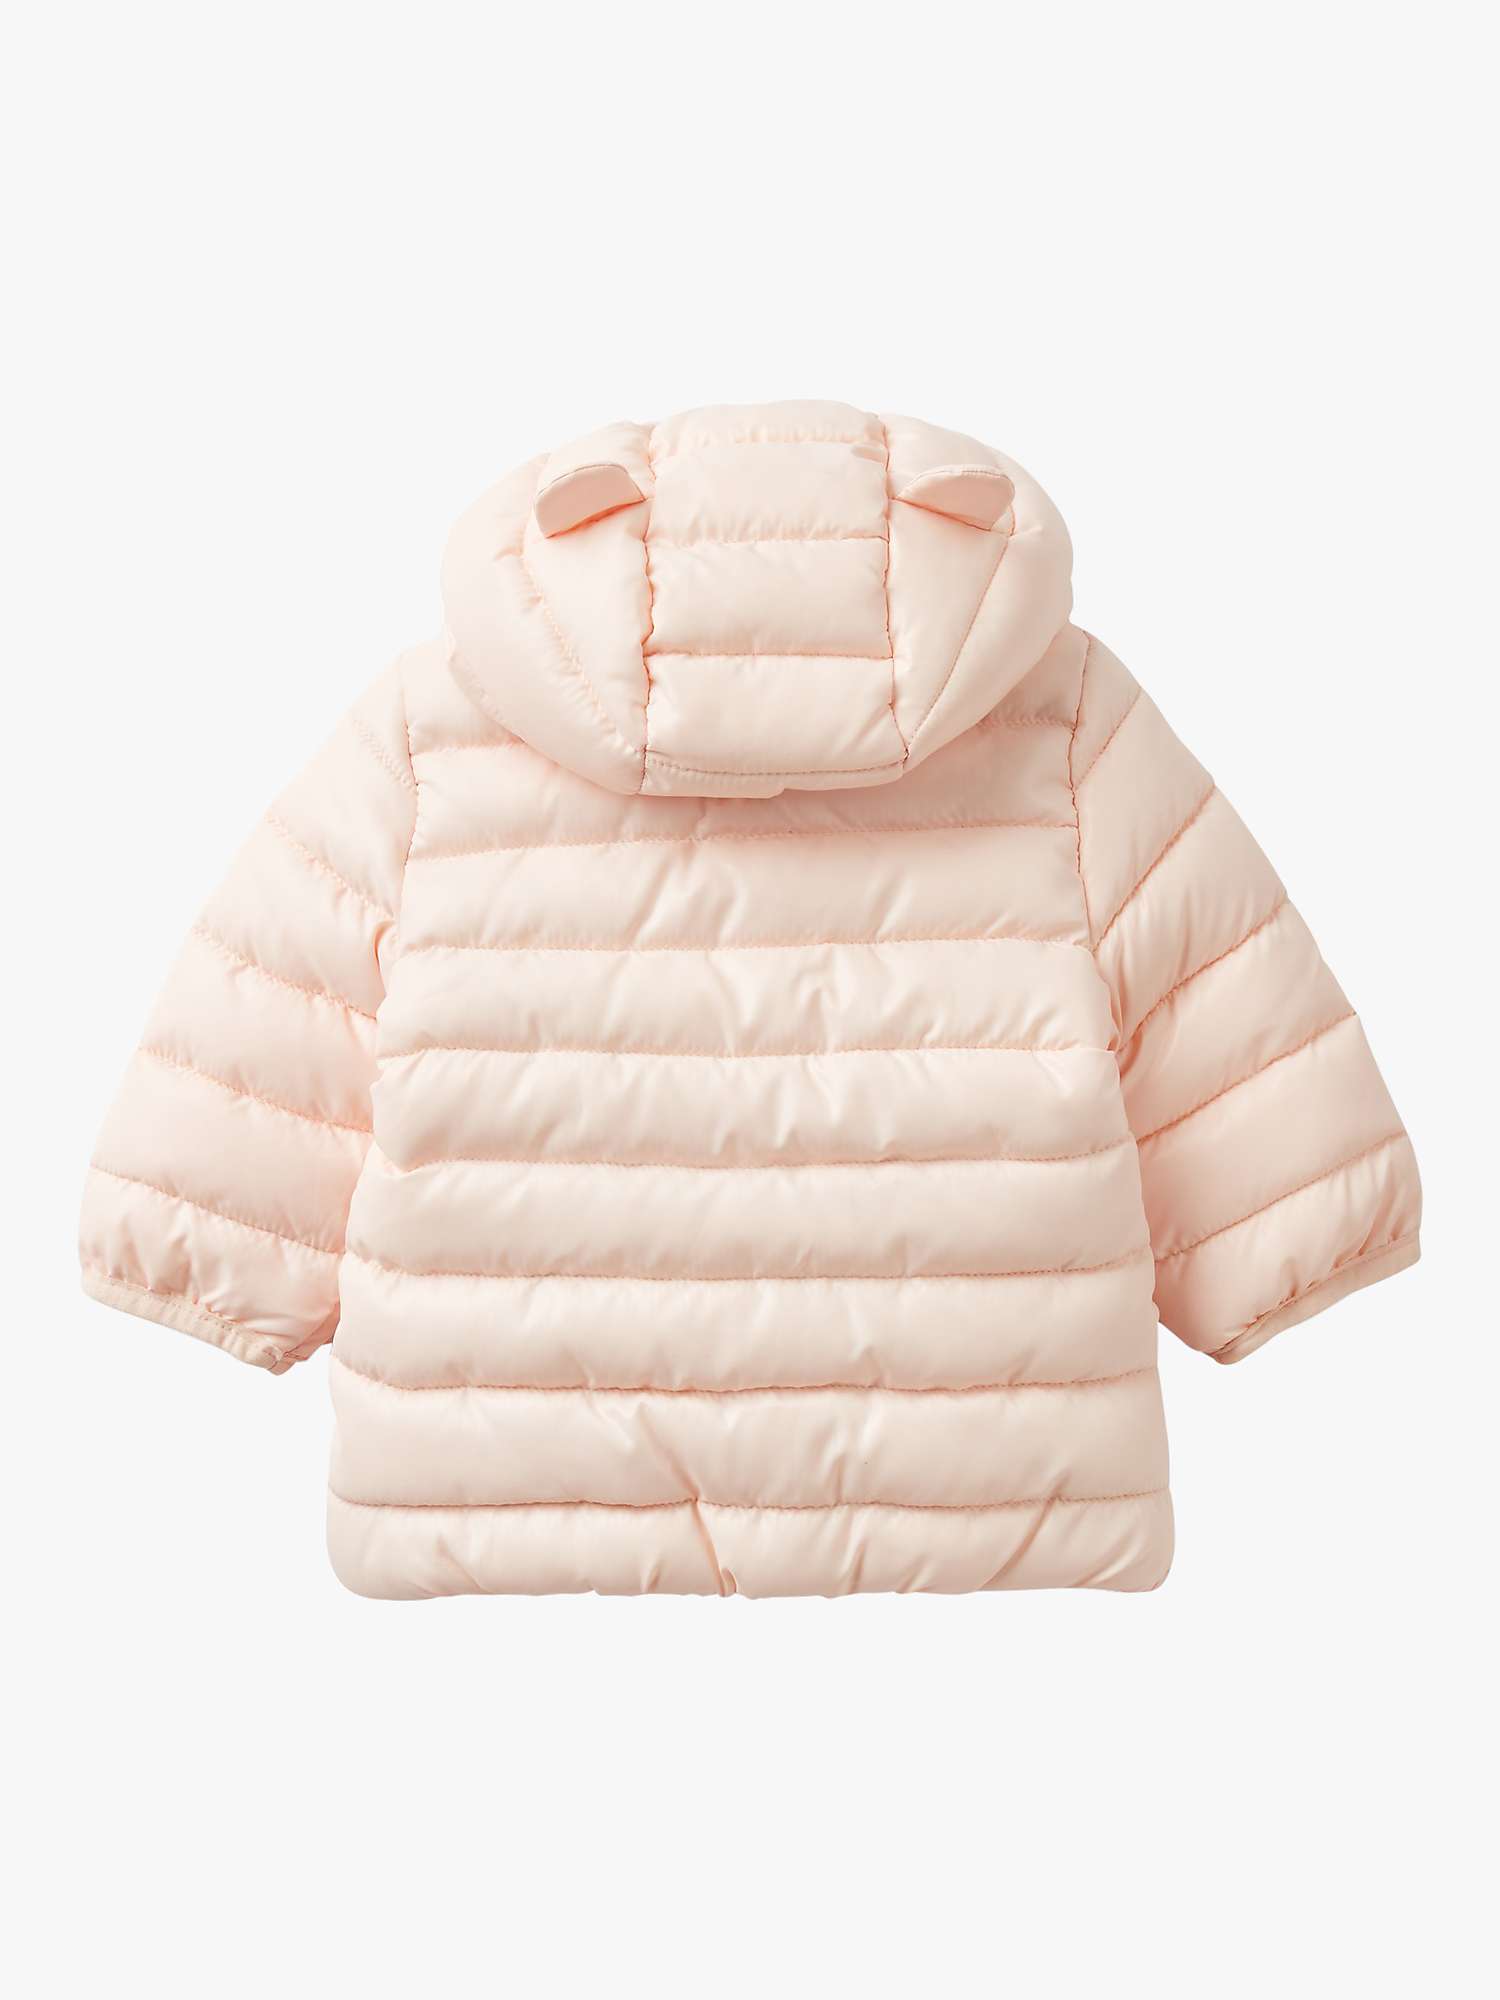 Buy Benetton Baby Hooded Padded Jacket Online at johnlewis.com